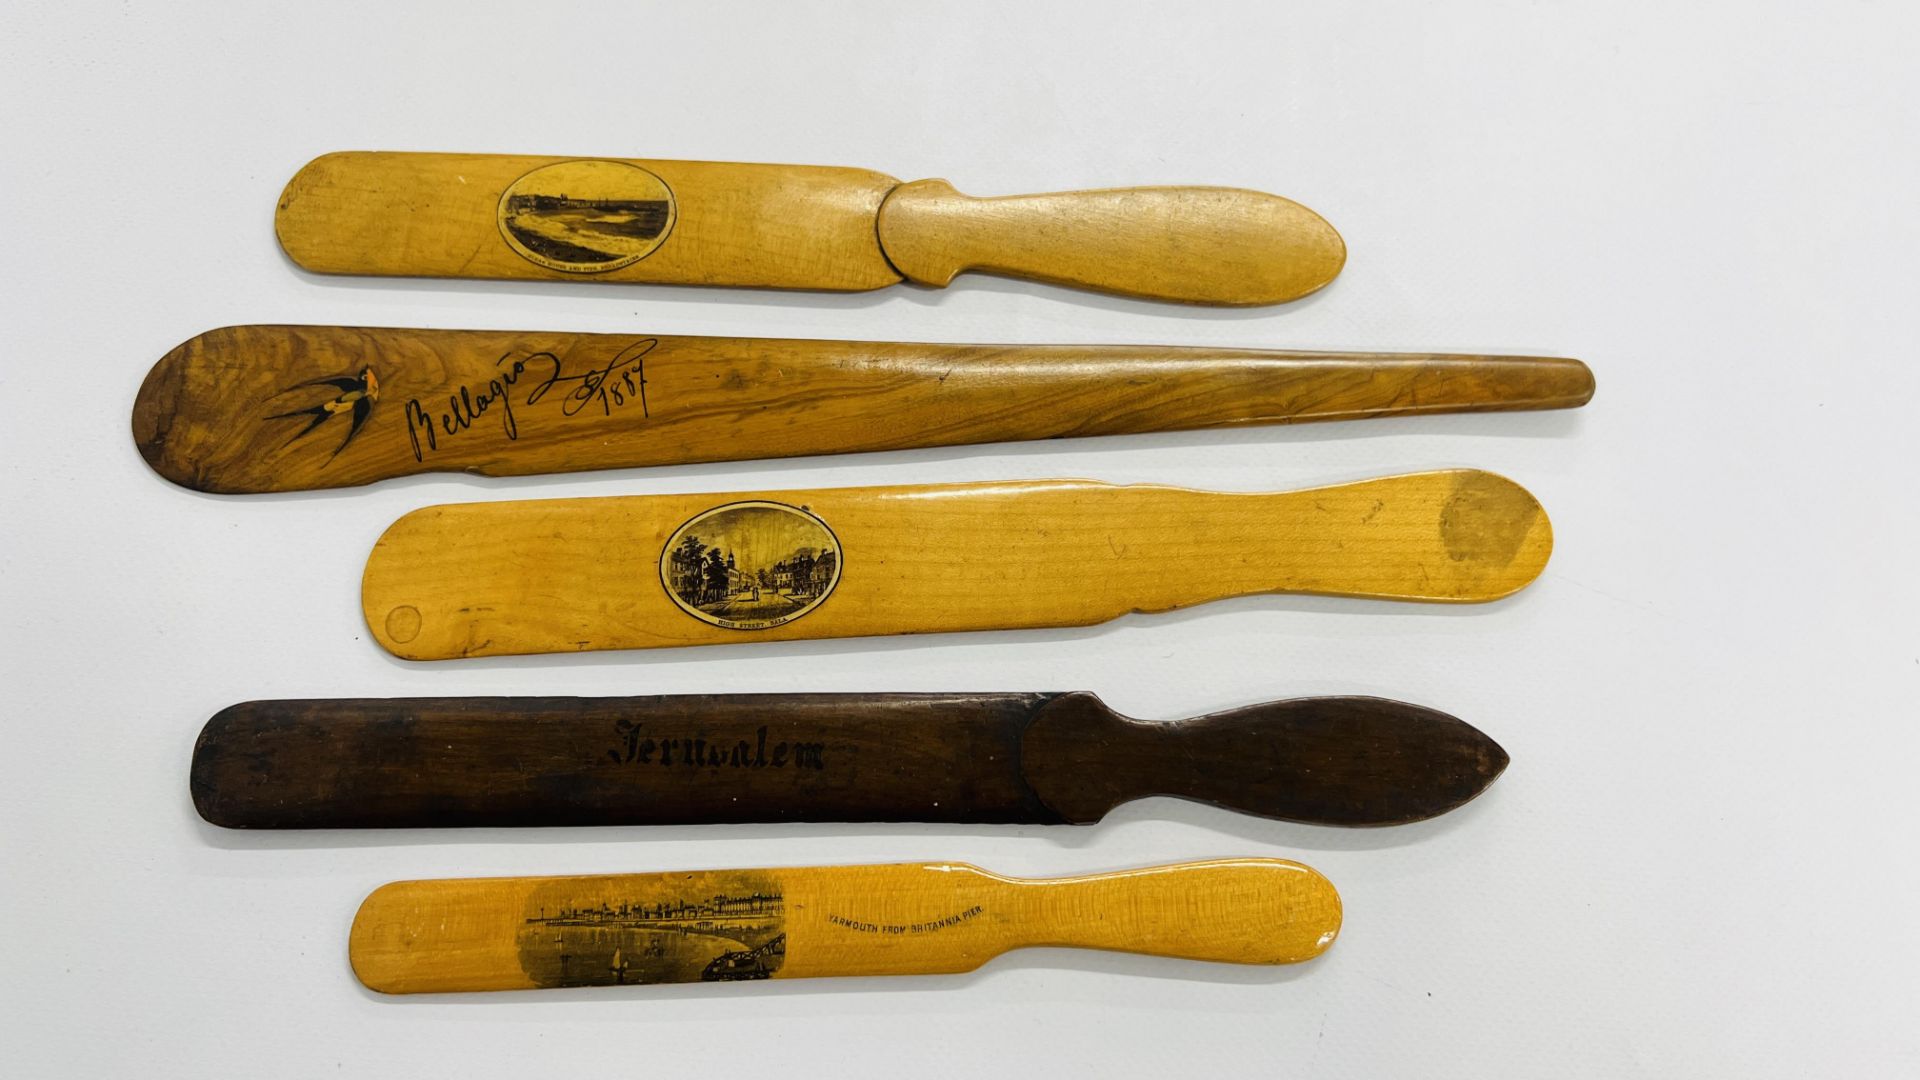 A GROUP OF 5 VINTAGE PAGE TURNERS TO INCLUDE MAUCHLINE WARE EXAMPLES.